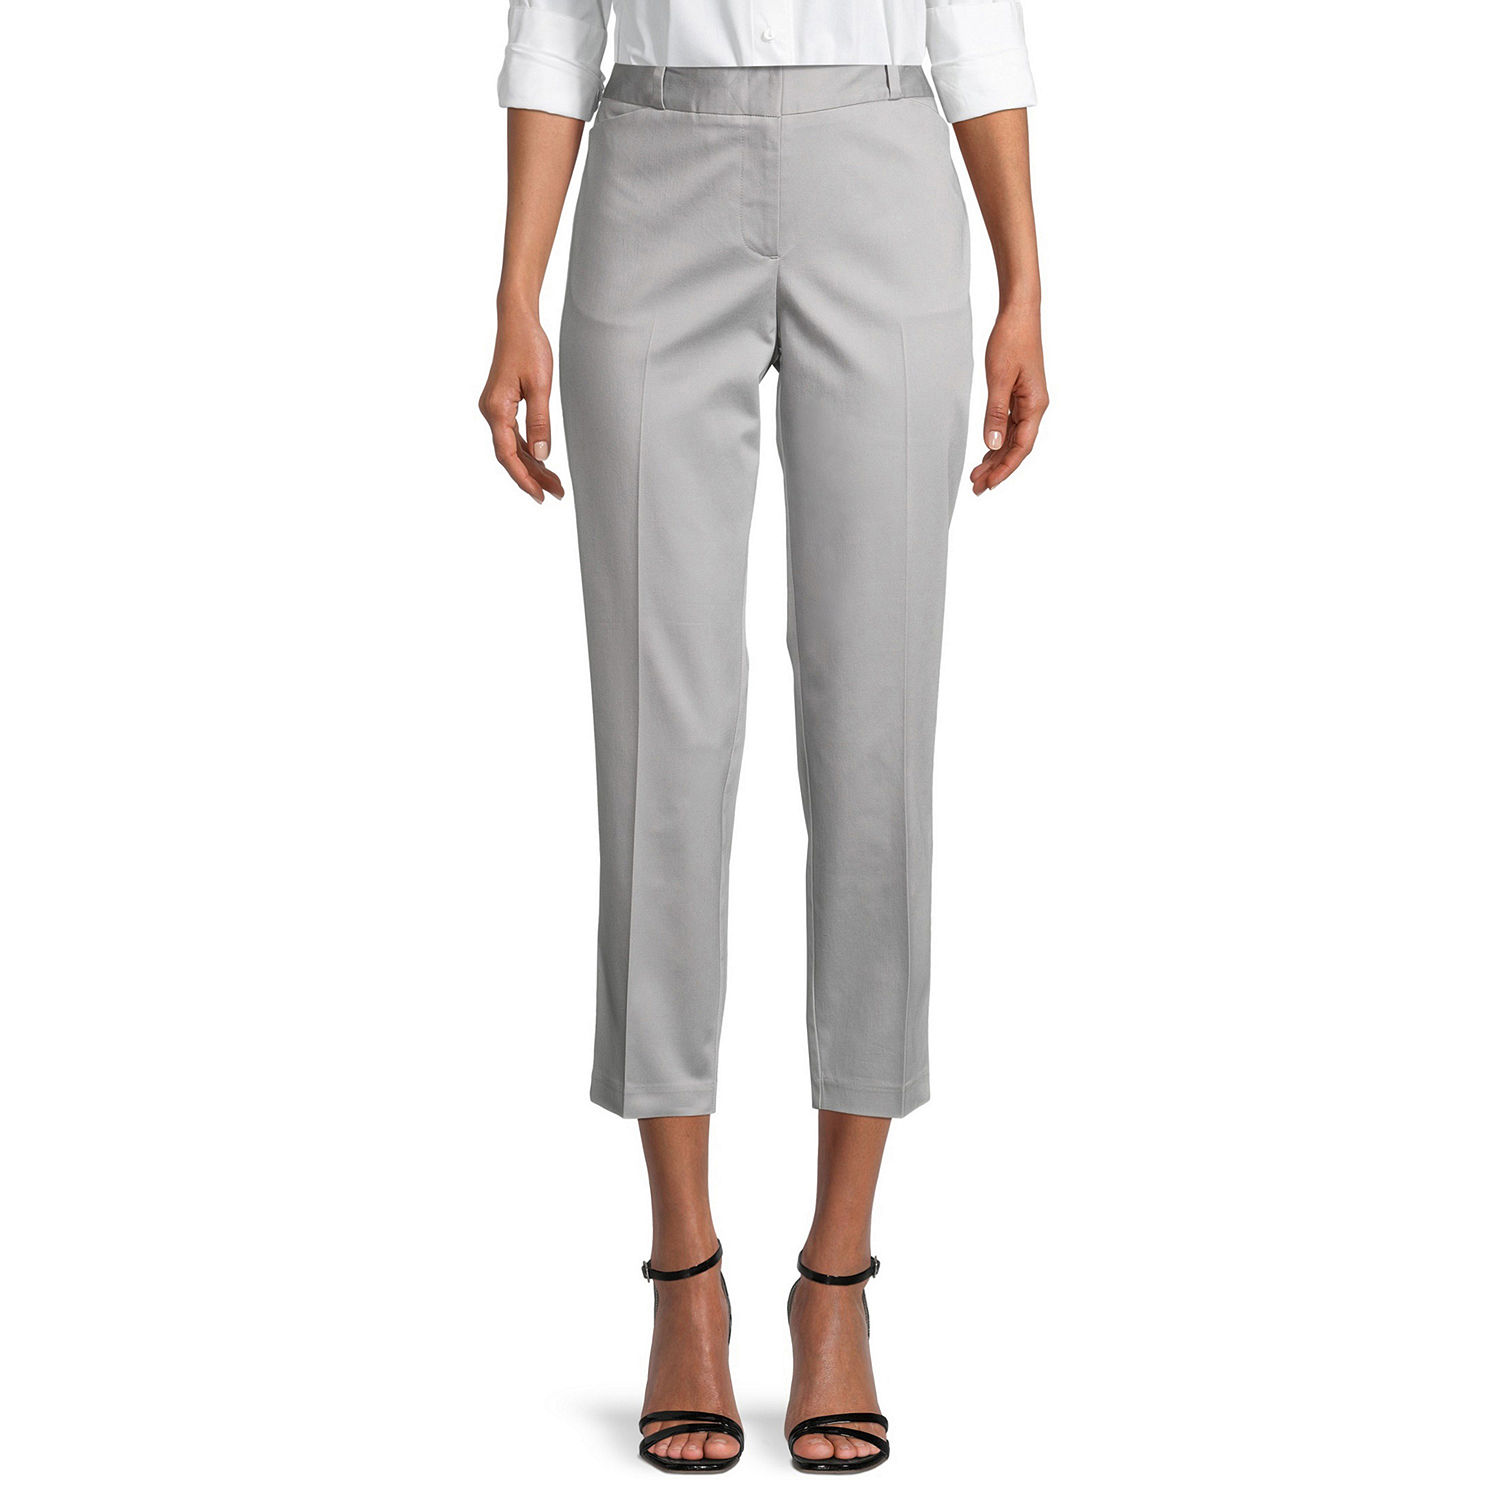 Liz Claiborne-Tall Emma Womens Slim Fit Ankle Pant - JCPenney